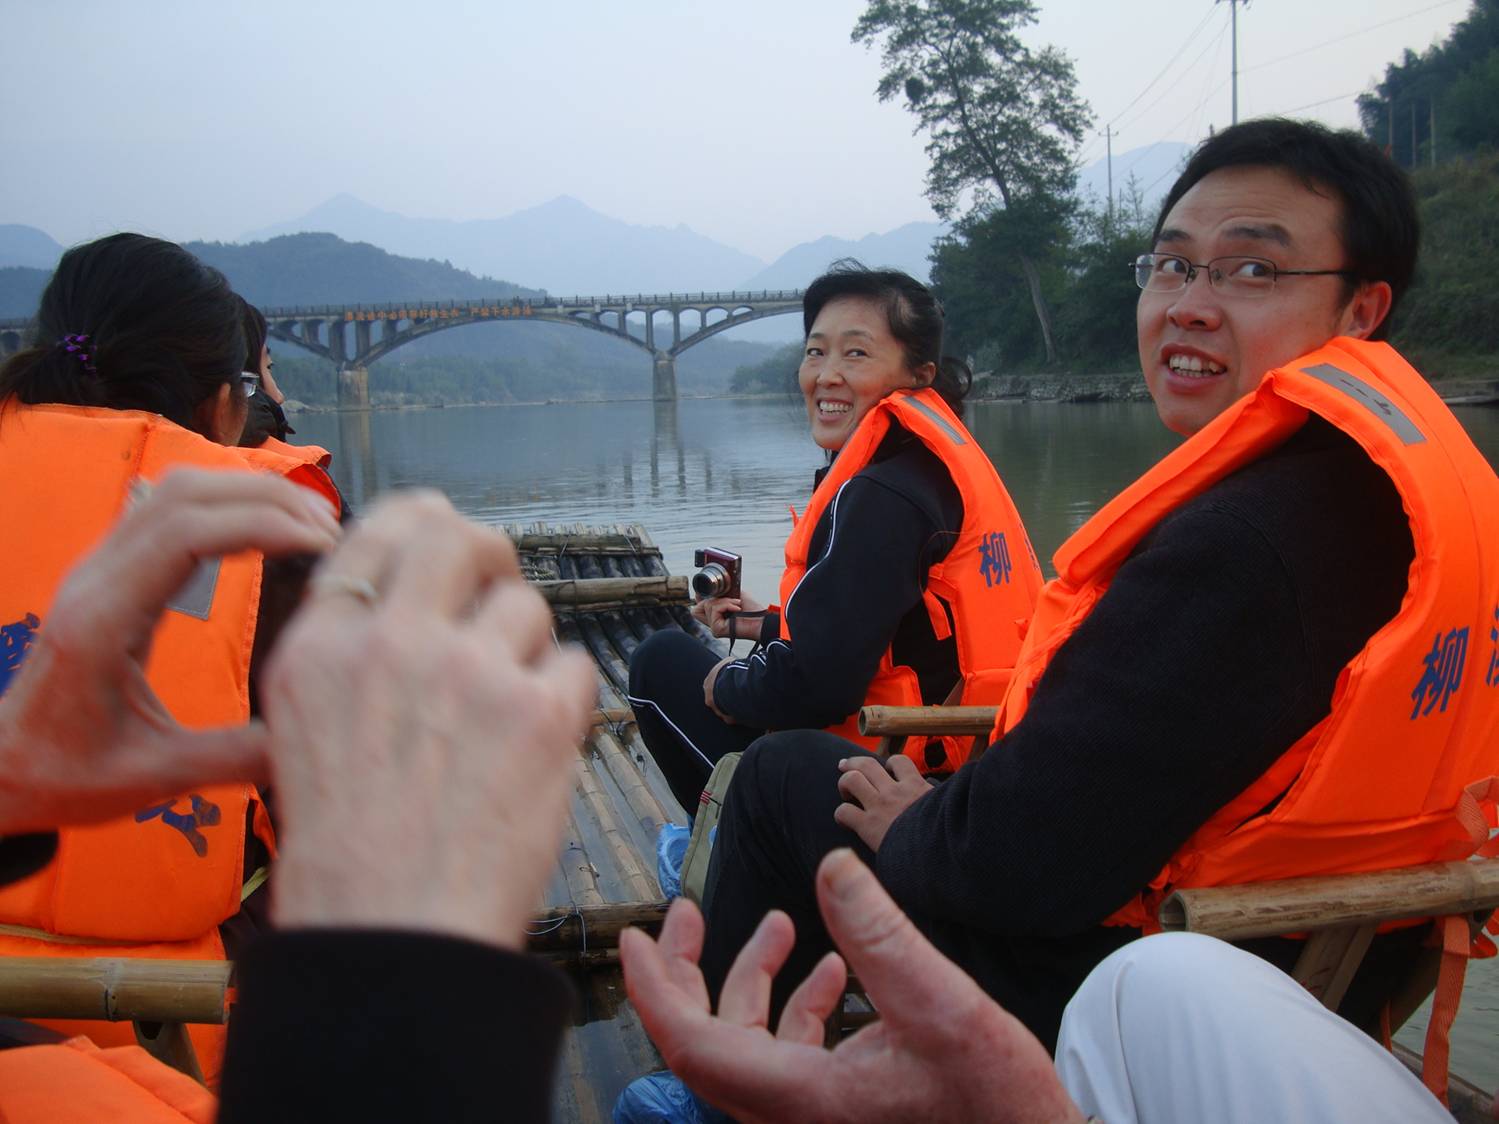 Picture: Happy ever rafters. River rafting in Zhejiang Province, China